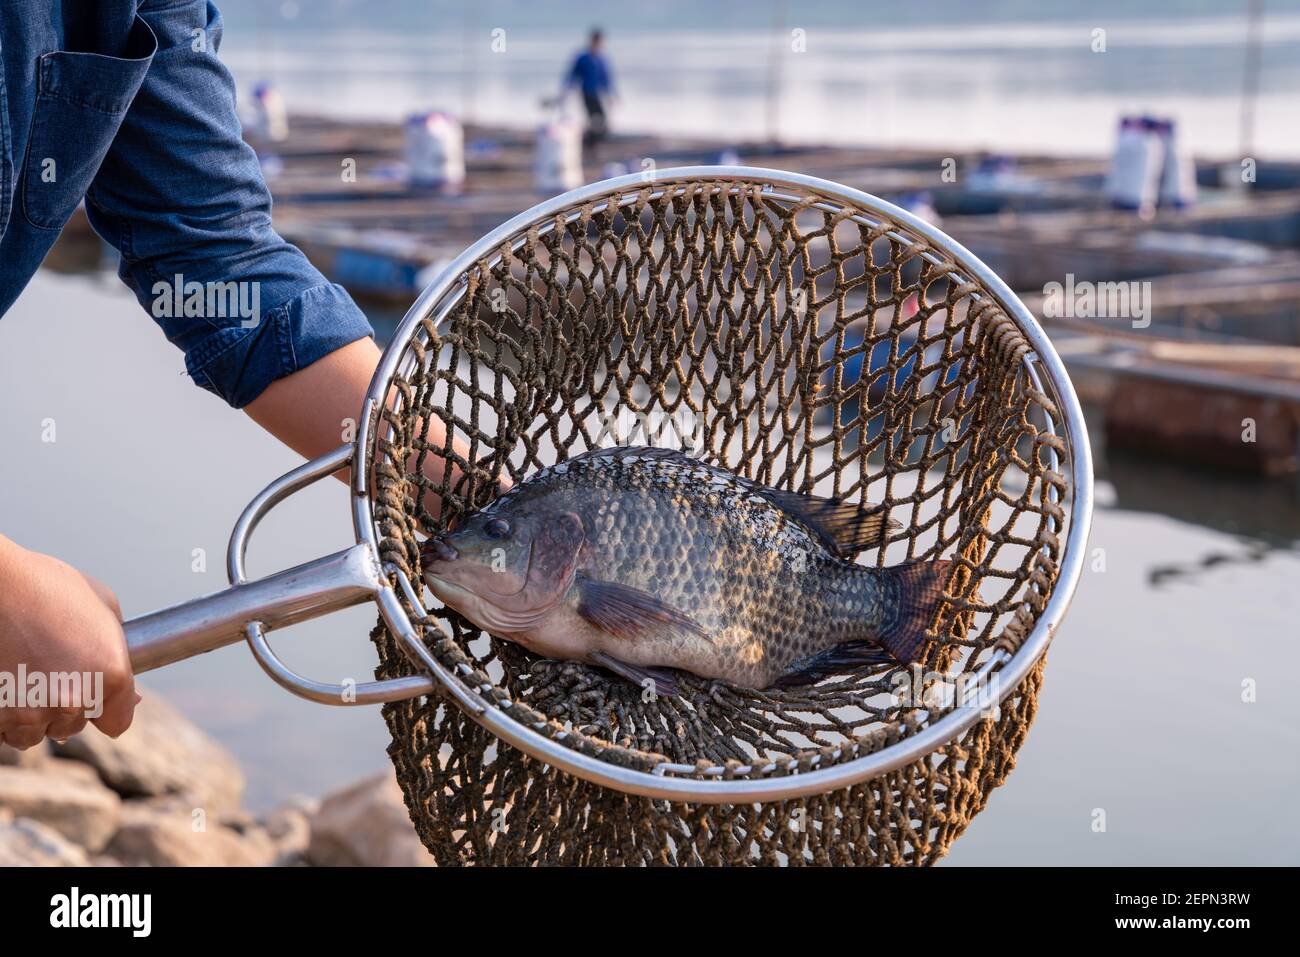 Close up fisherman catch tilapia fish, freshwater fish that was raised in ponds and cages. Stock Photo